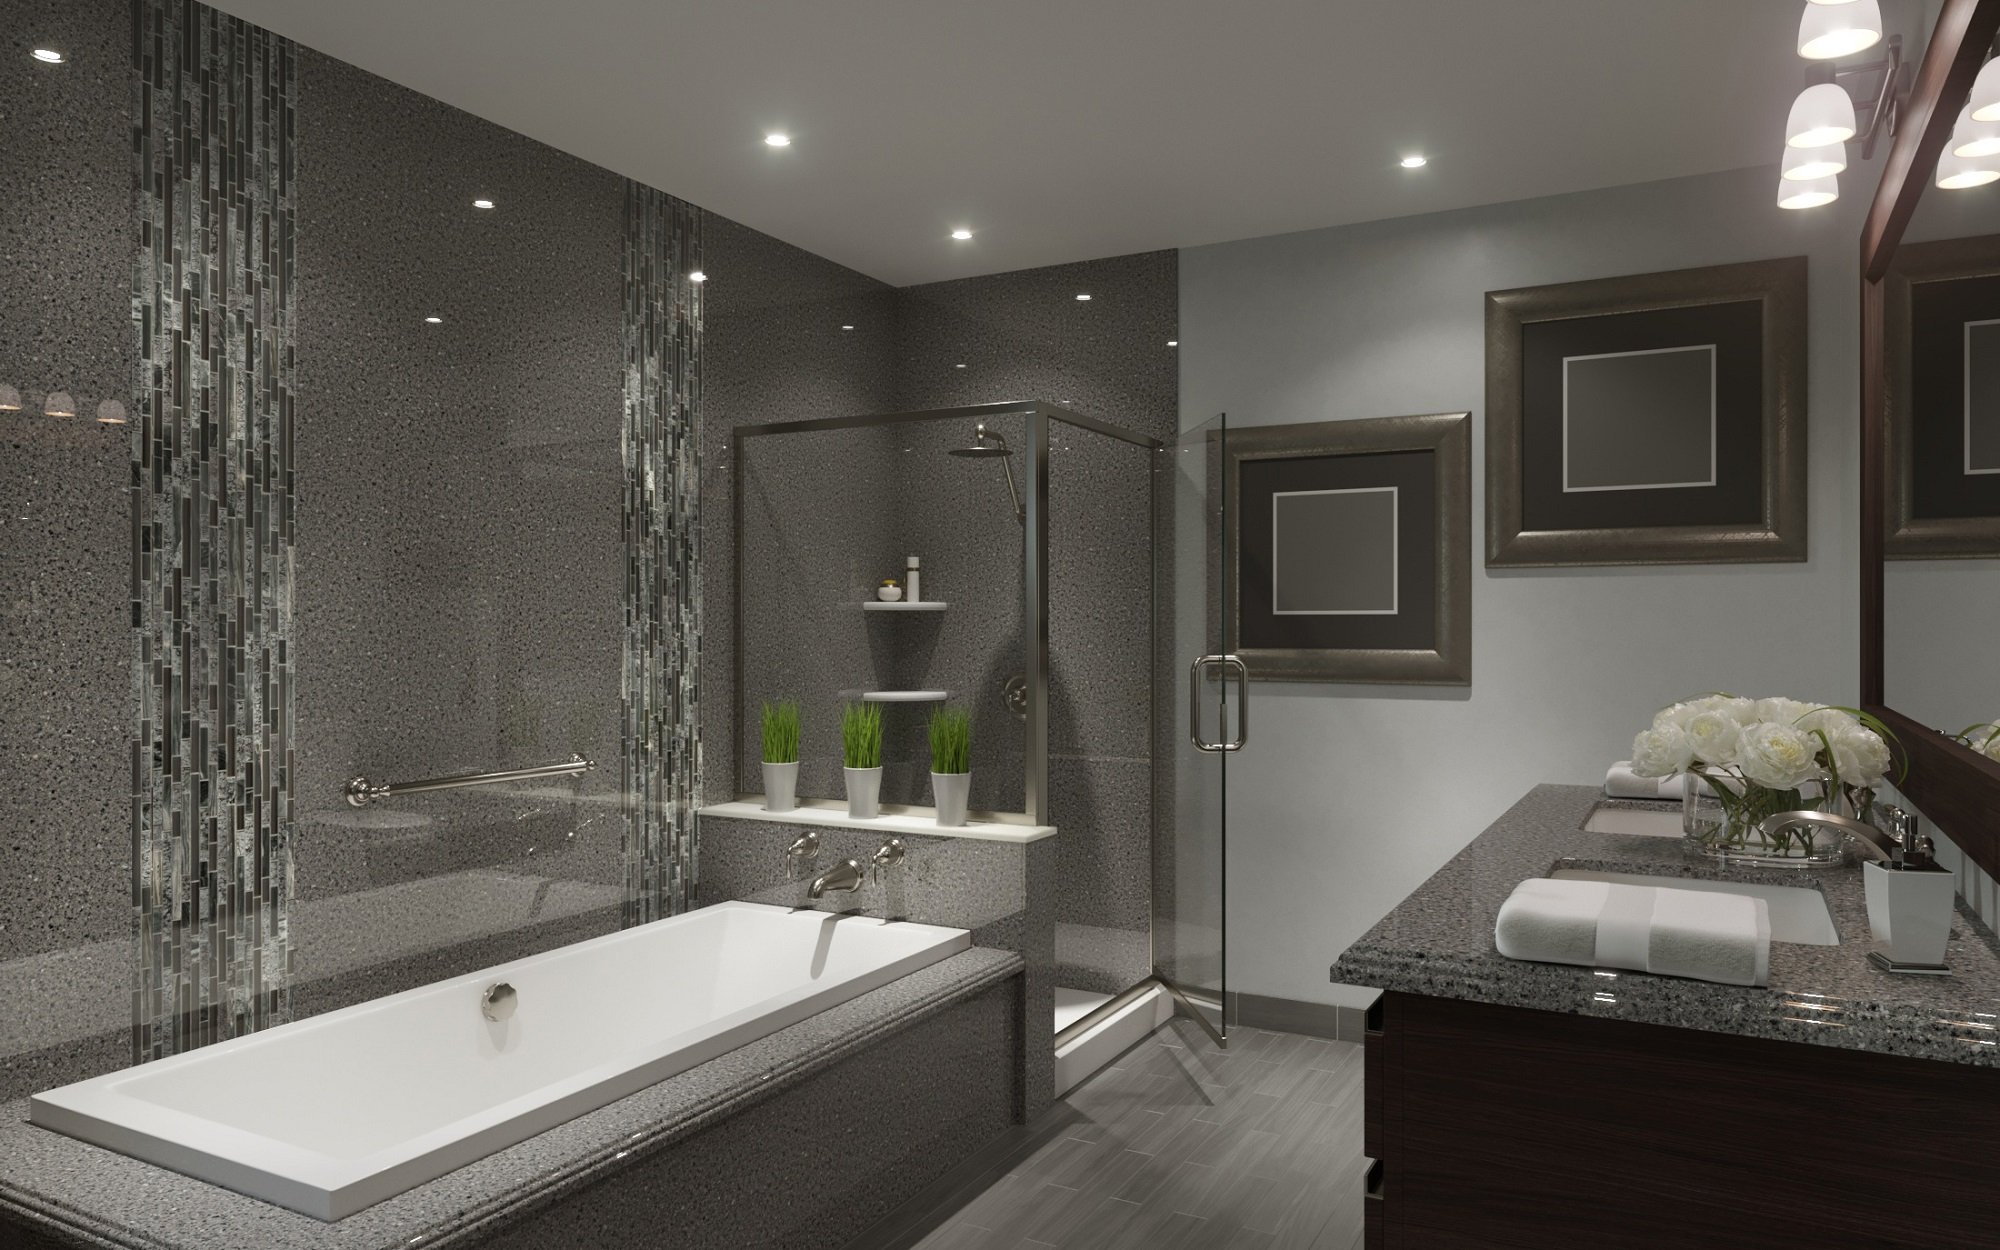 Call Bolingbrook Bathroom Renovation Experts For Walk-In Shower Installations!